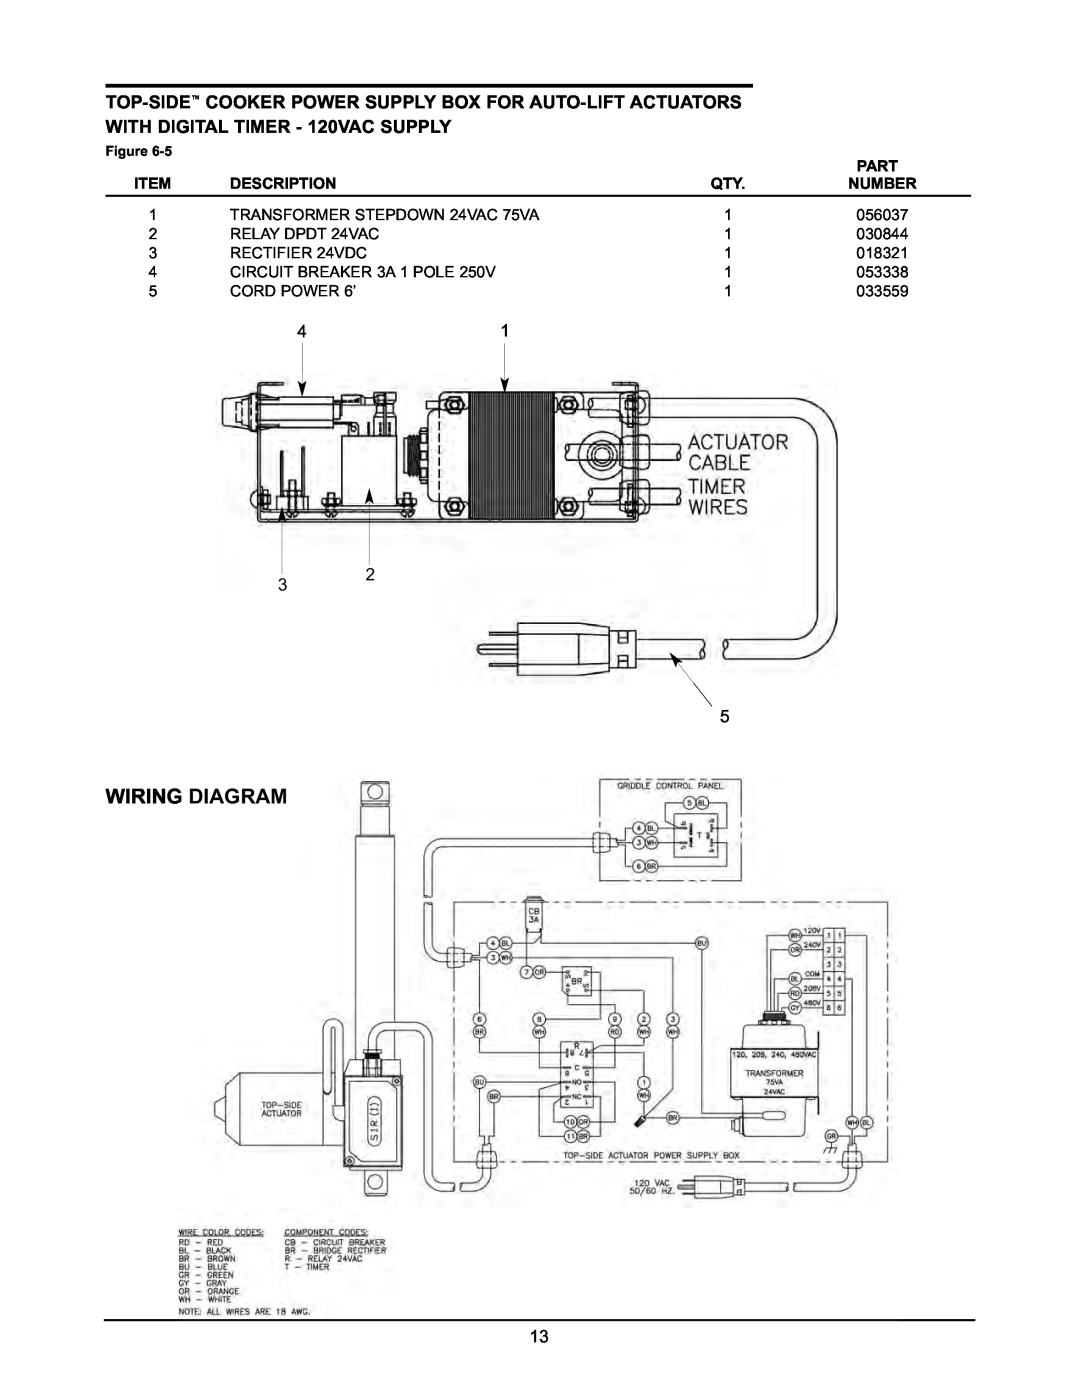 Keating Of Chicago 2005 user manual Wiring Diagram, WITH DIGITAL TIMER - 120VAC SUPPLY 